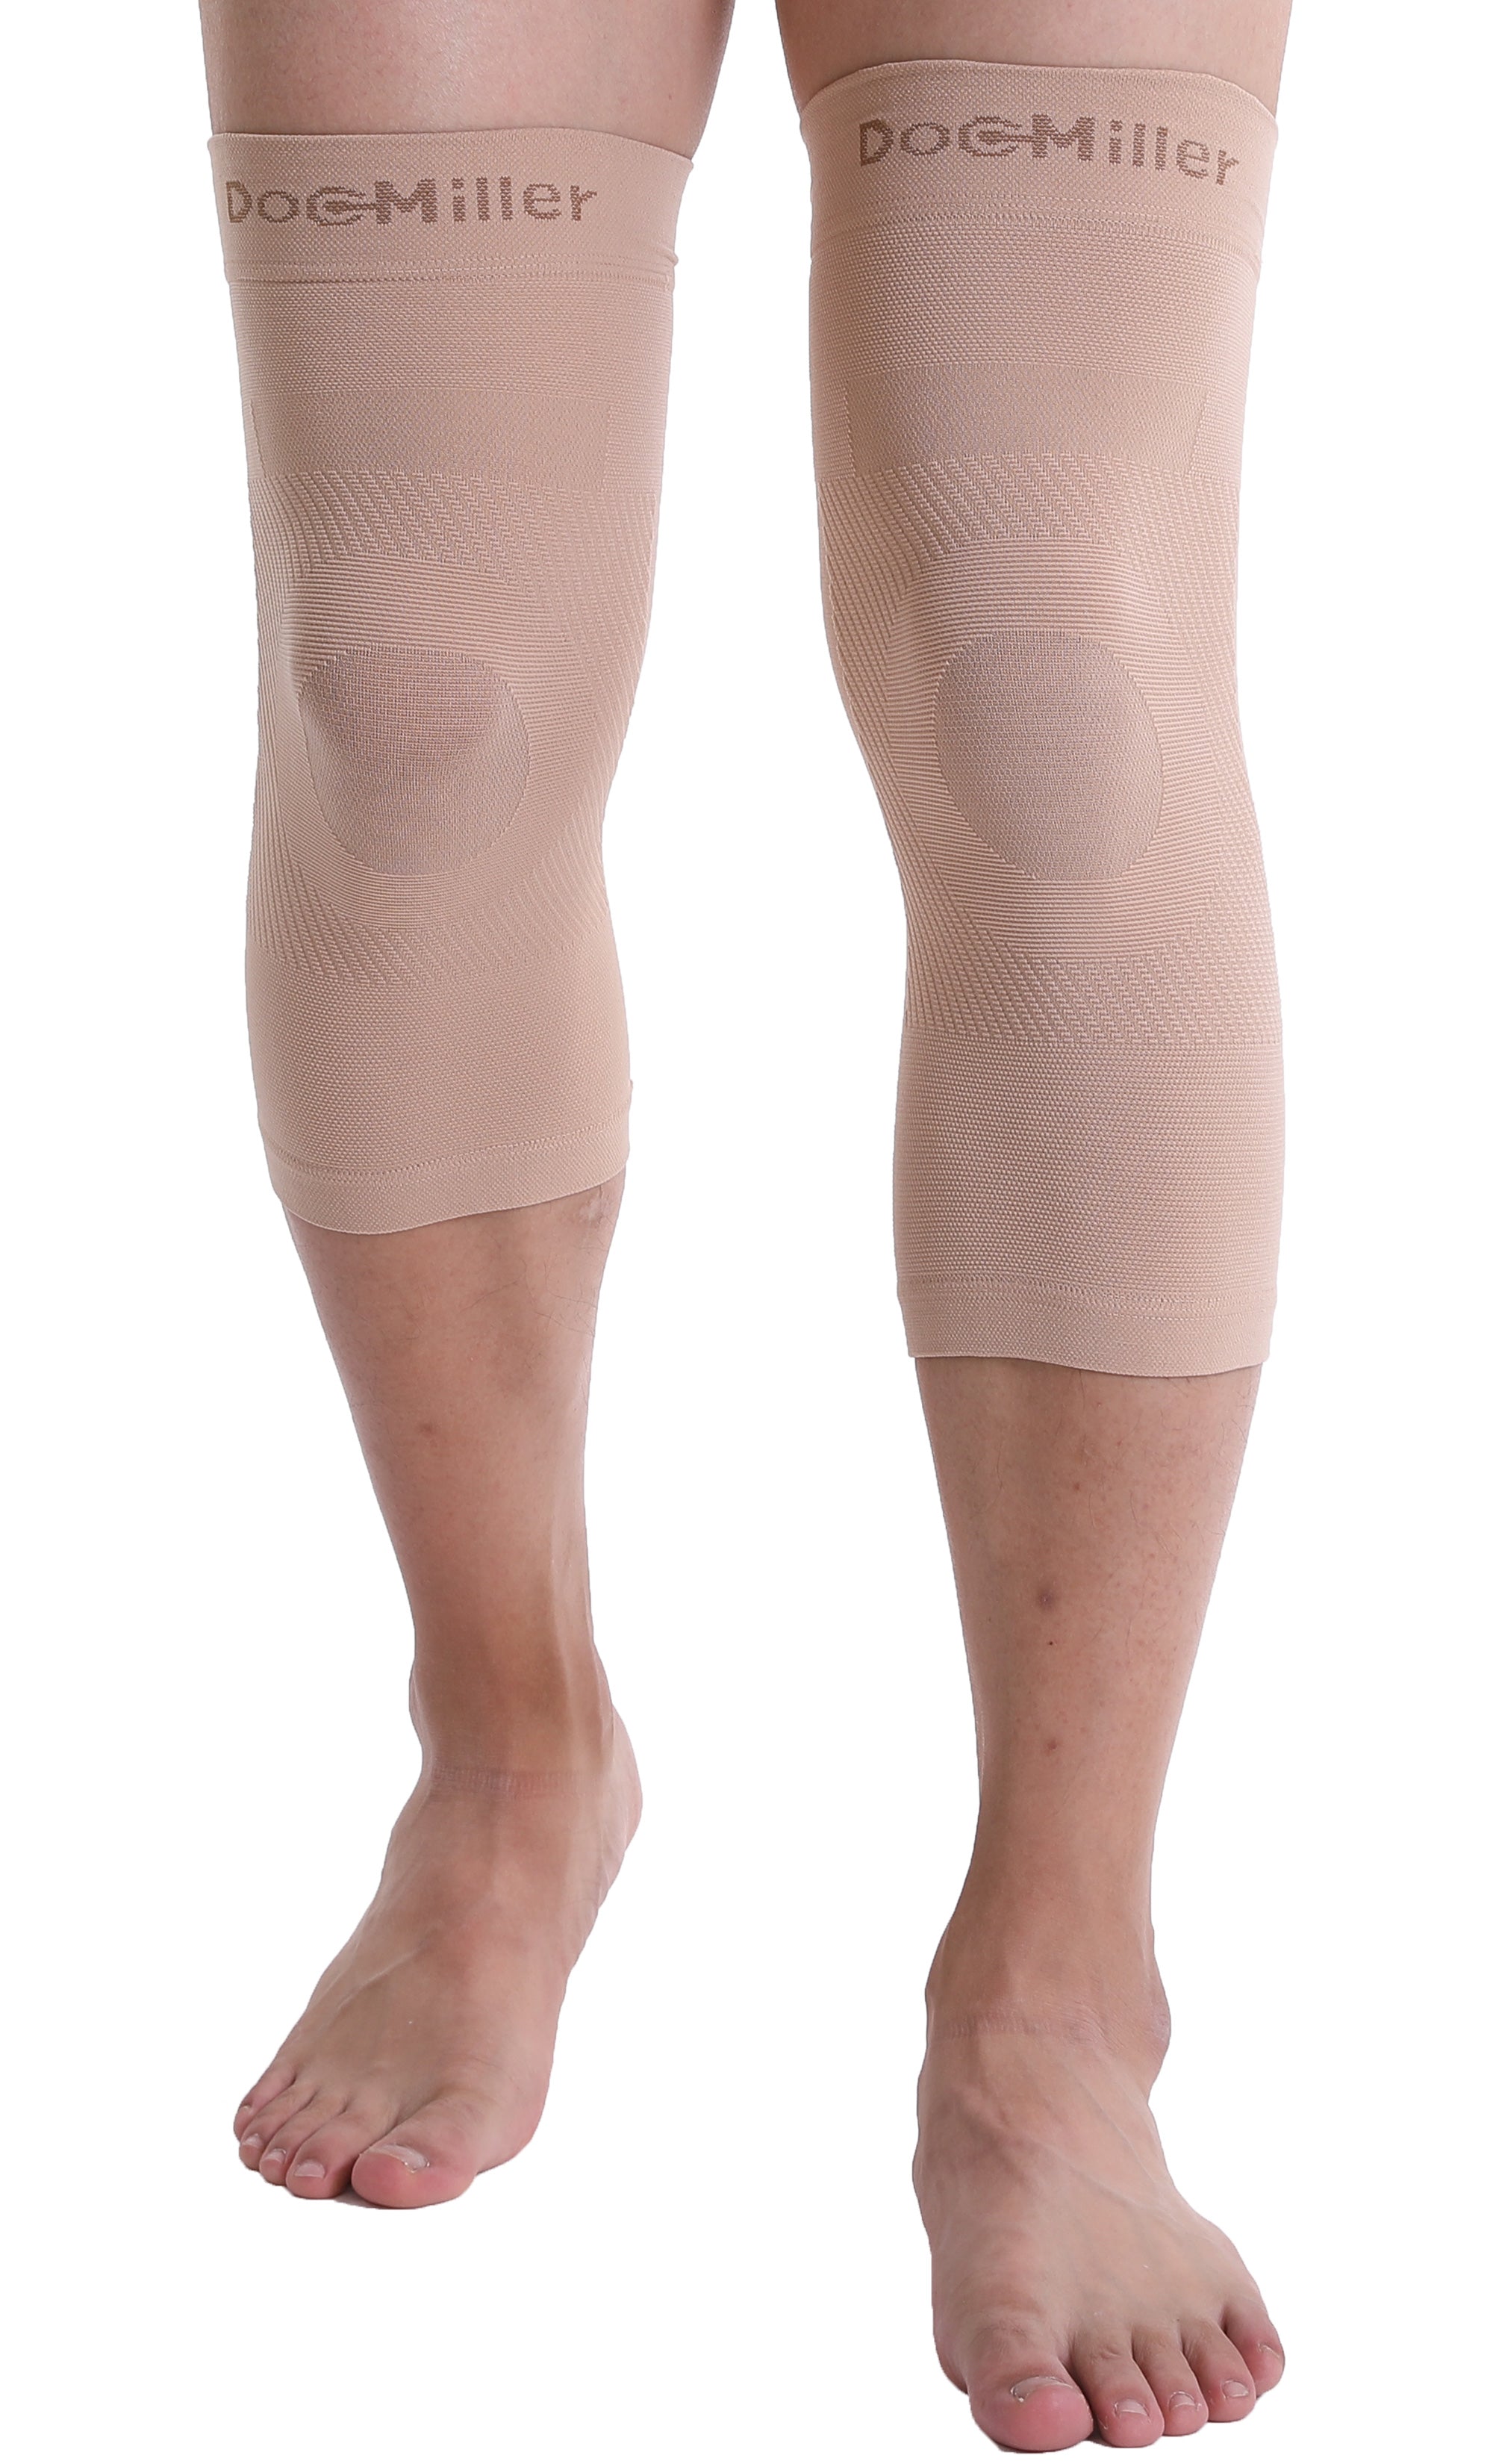 Therall, Arthritis Knee Sleeve, Liberty Athletic & Medical Supplies